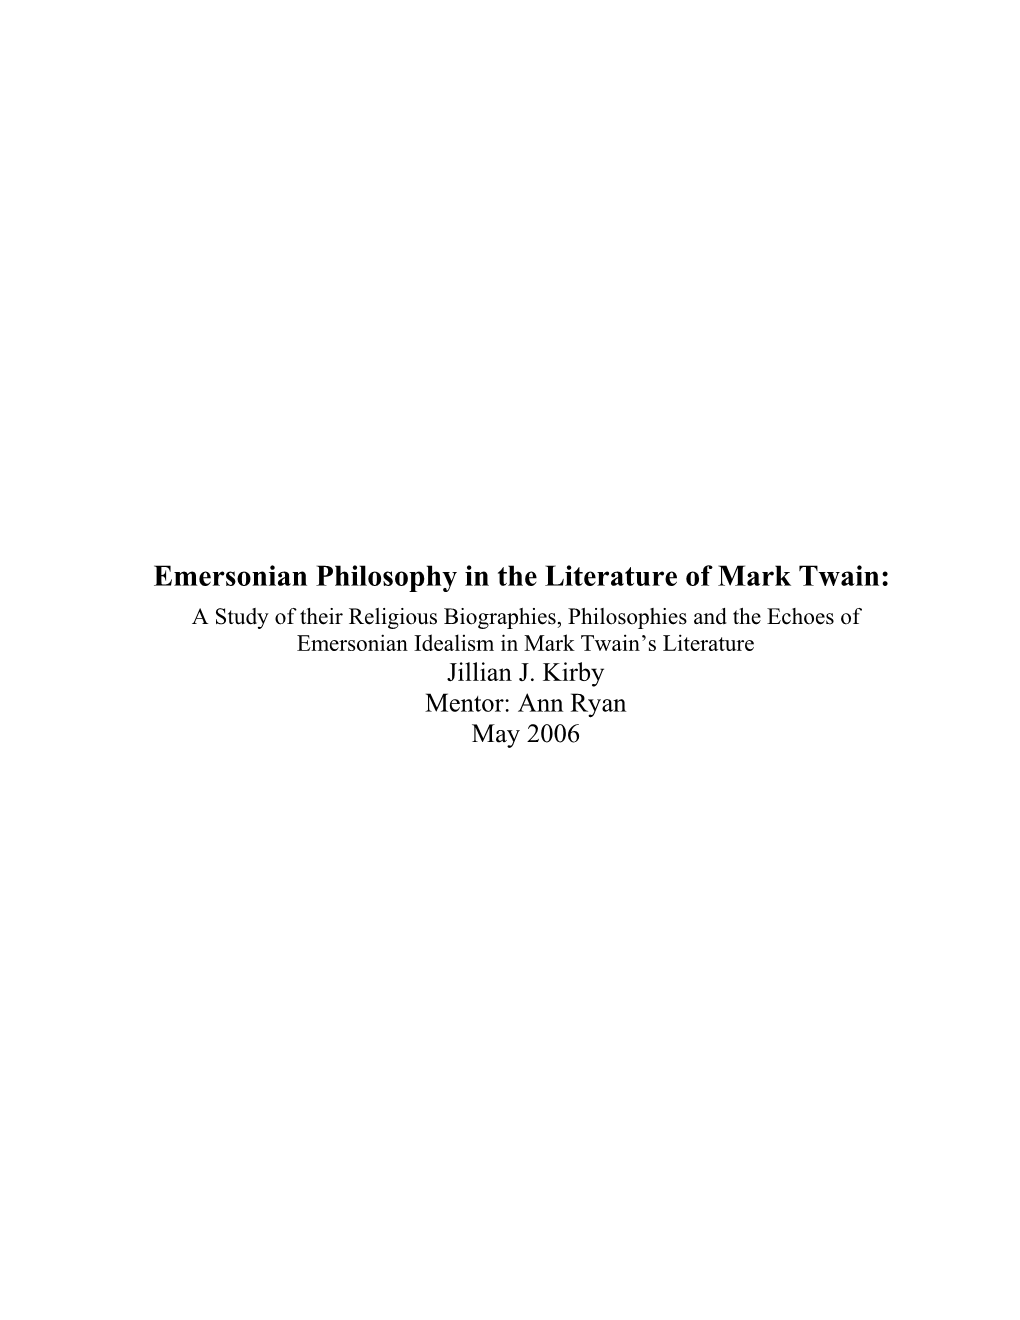 Emersonian Philosophy in the Literature of Mark Twain